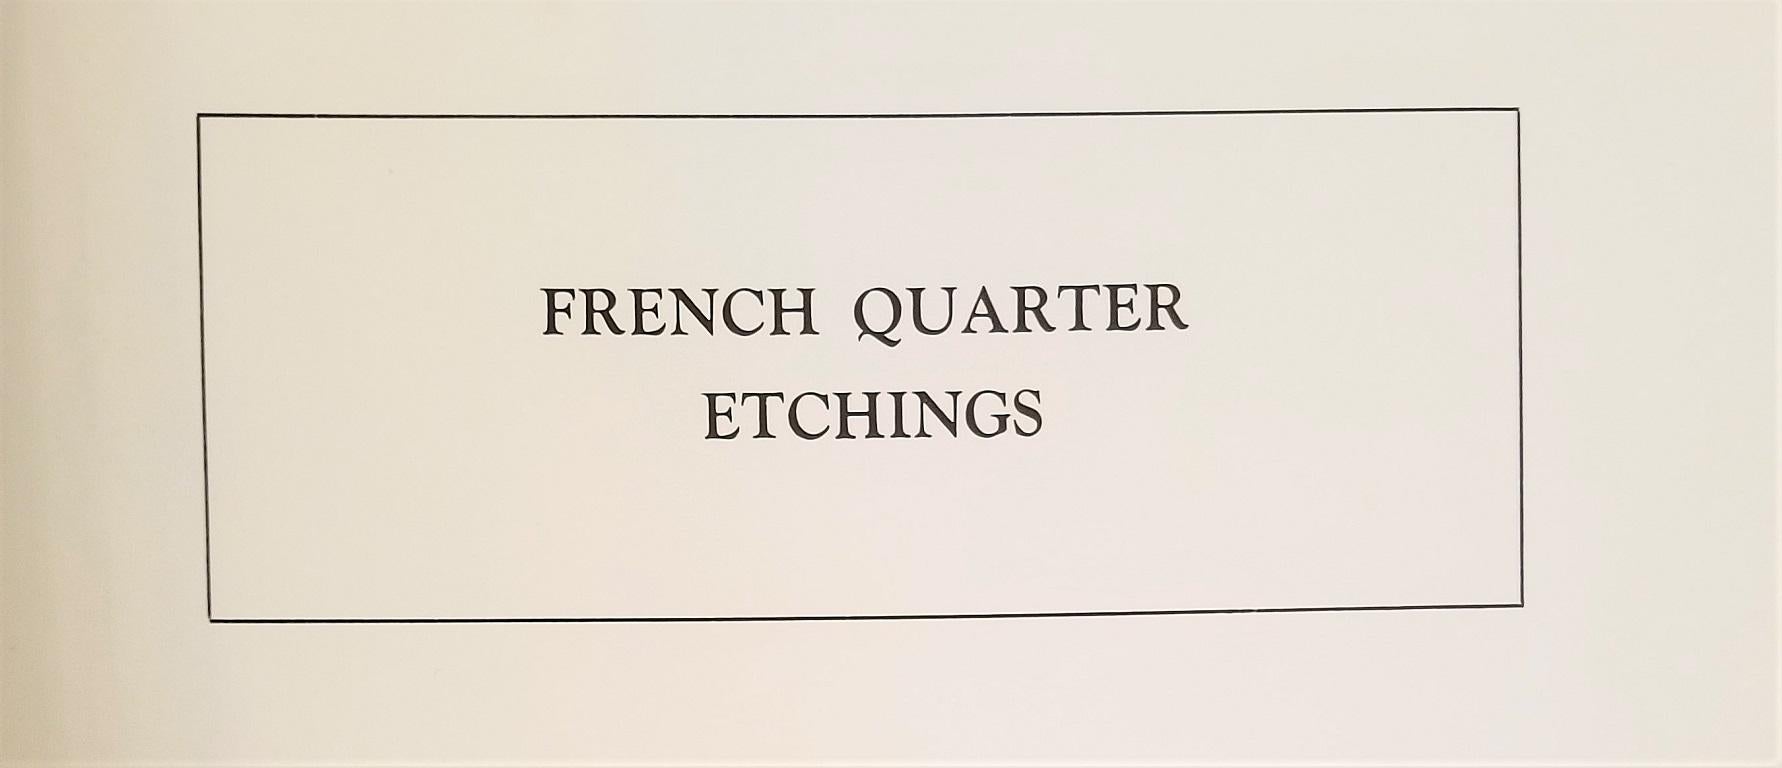 Engraved First Edition First Printing of French Quarter Etchings by W Woodward